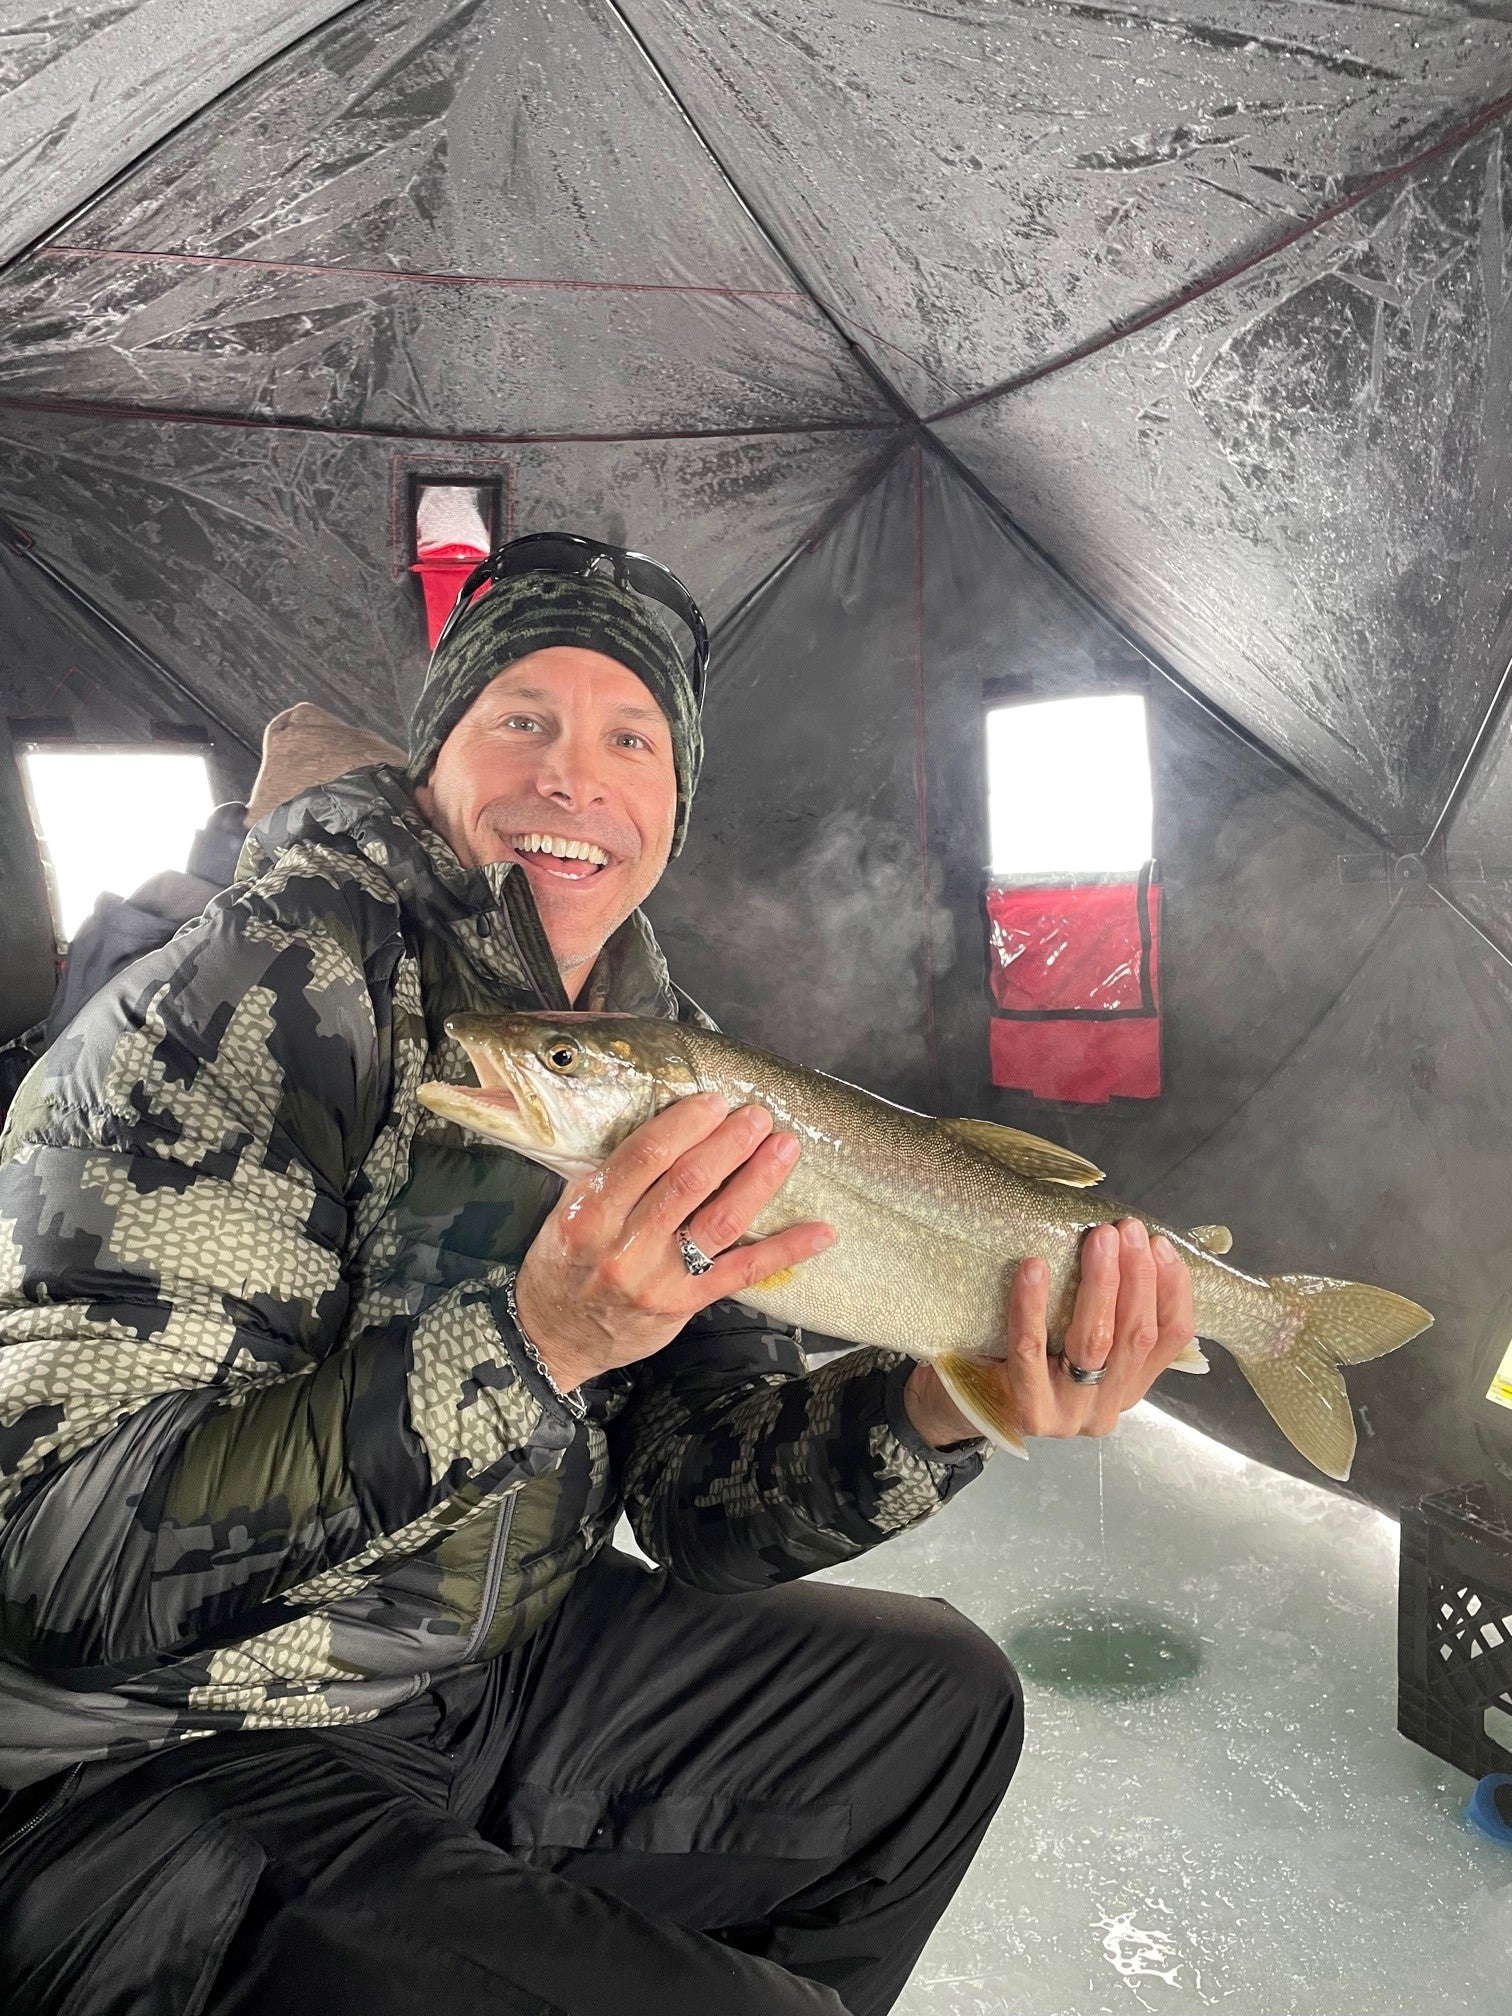 Lets talk ice fishing in the Gunnison Valley!